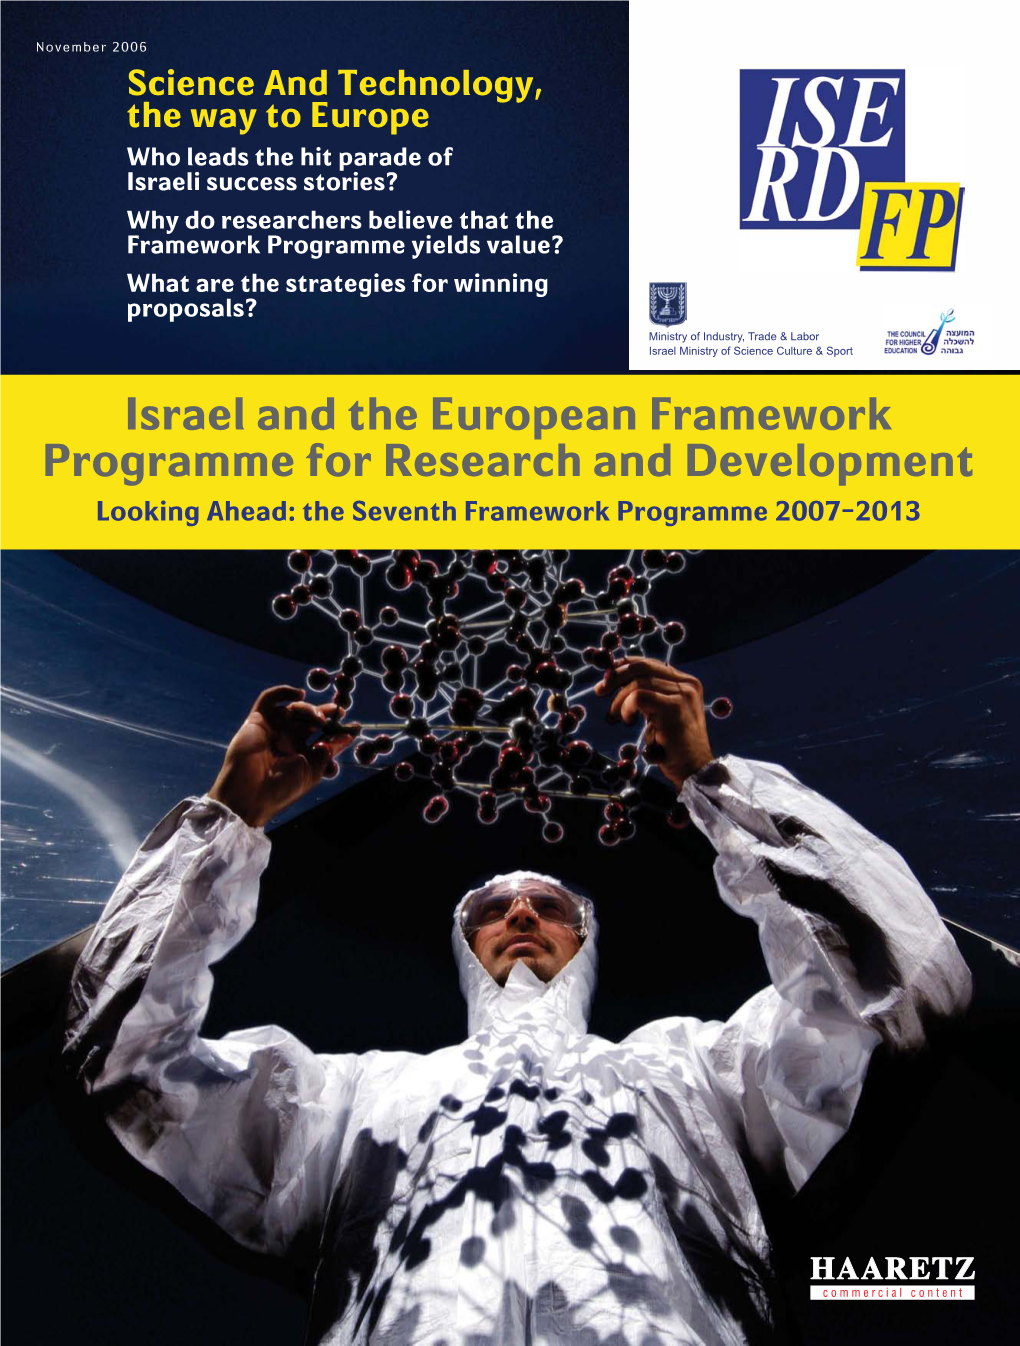 Israel and the European Framework Programme for Research and Development Looking Ahead: the Seventh Framework Programme 2007-2013